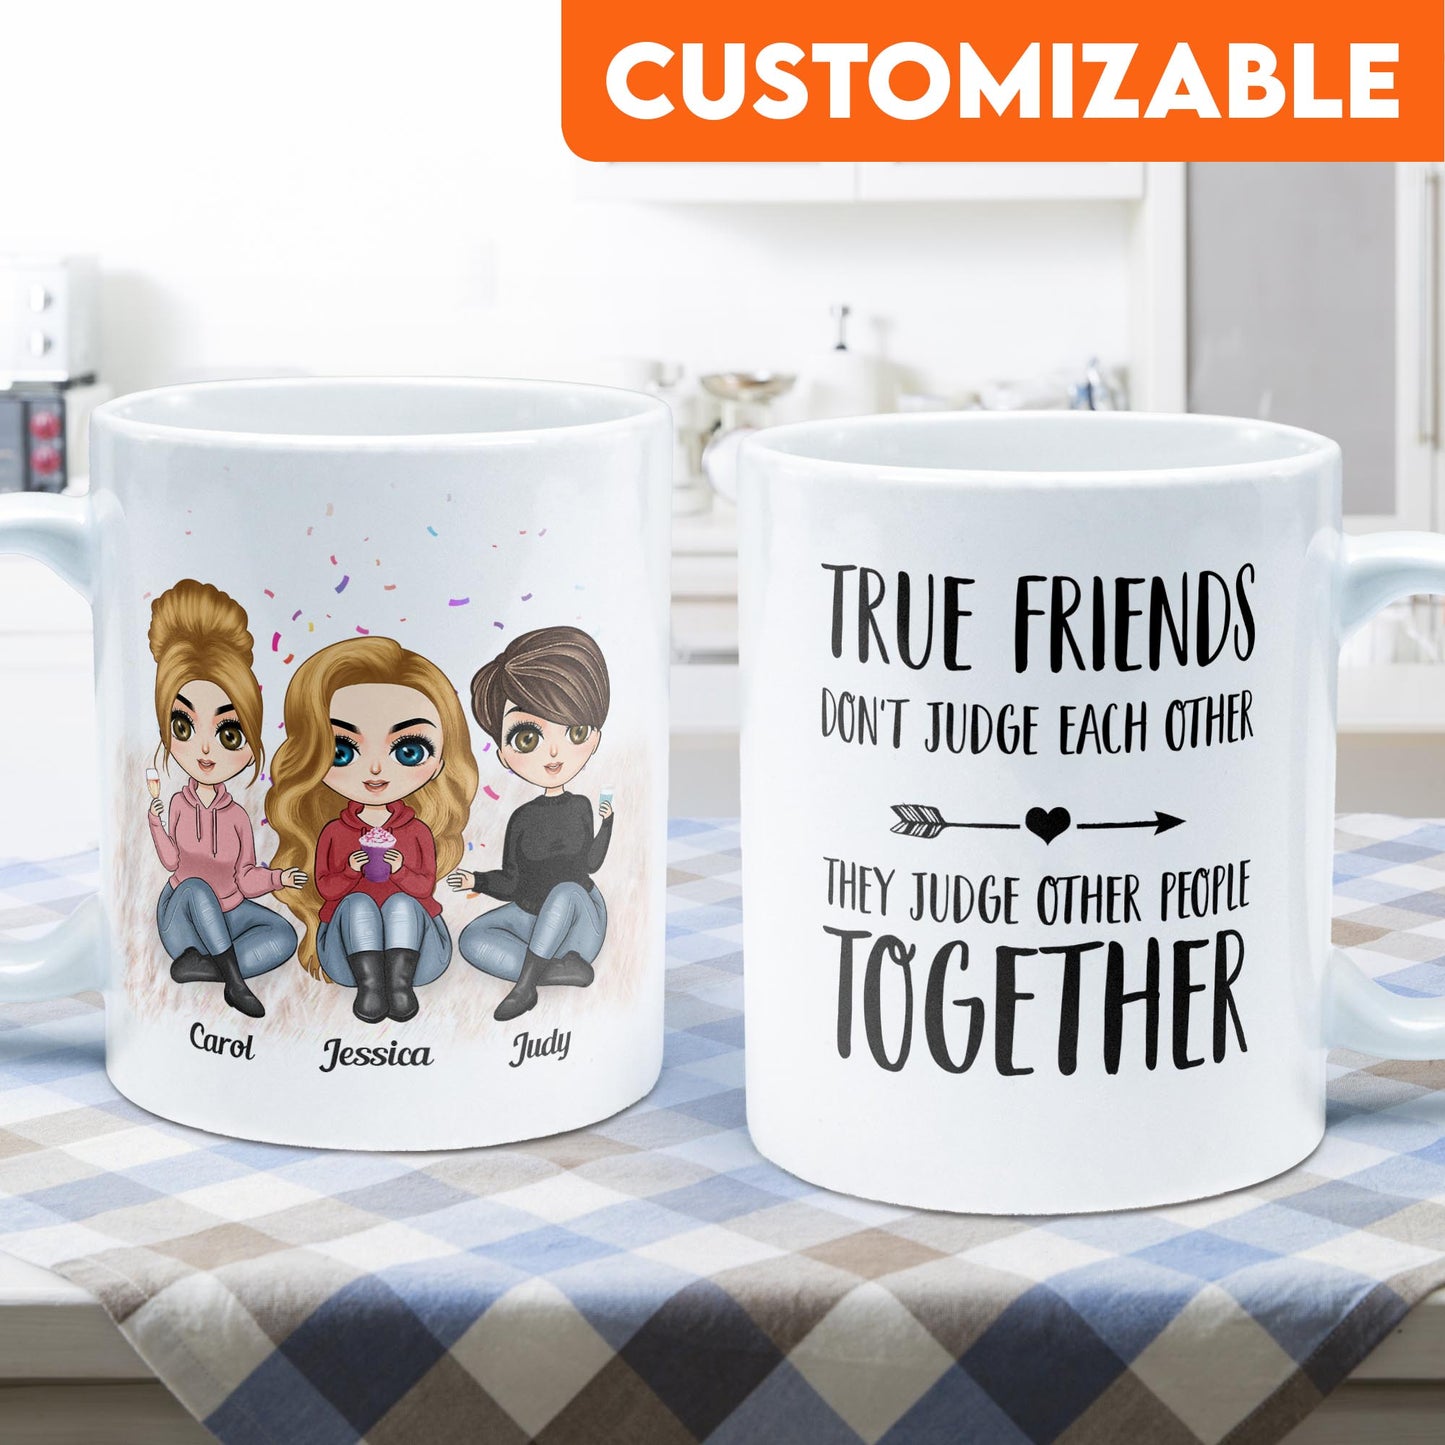 True Friends Don't Judge Each Other - Personalized Mug - Birthday & Christmas Gift For Bestie, Best Friend, BFF